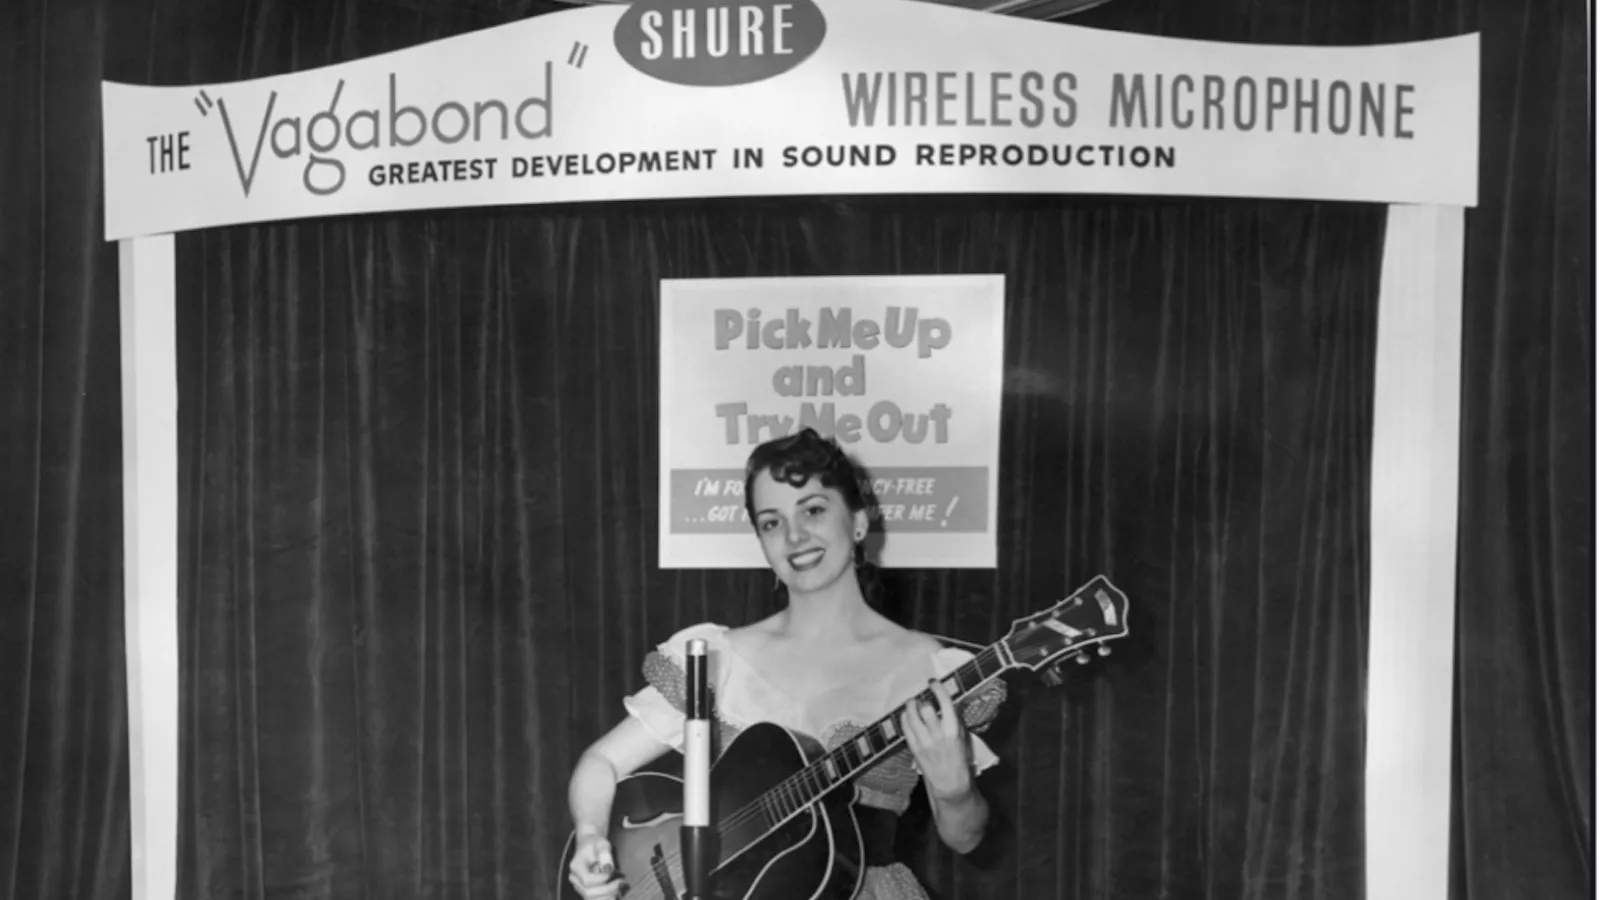 An archive image of a woman using a Vagabond wireless mic